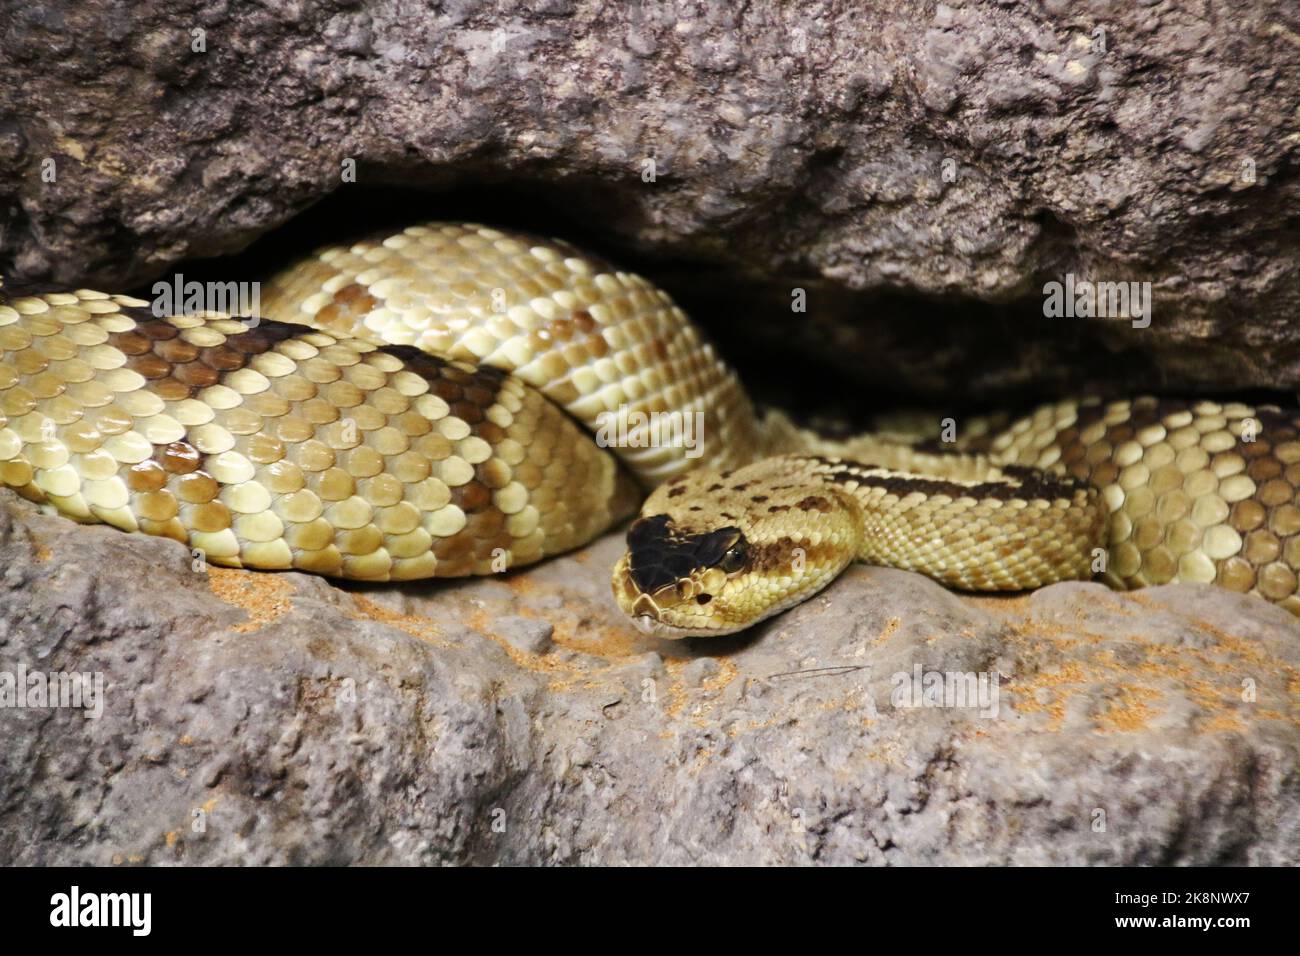 Skansen Aquarium at Skansen. Skansen Aquarium is a tropical house with rainforest environments and an aquarium, located at Skansen in Stockholm, Sweden. In the picture: a black-tailed rattlesnake. Stock Photo